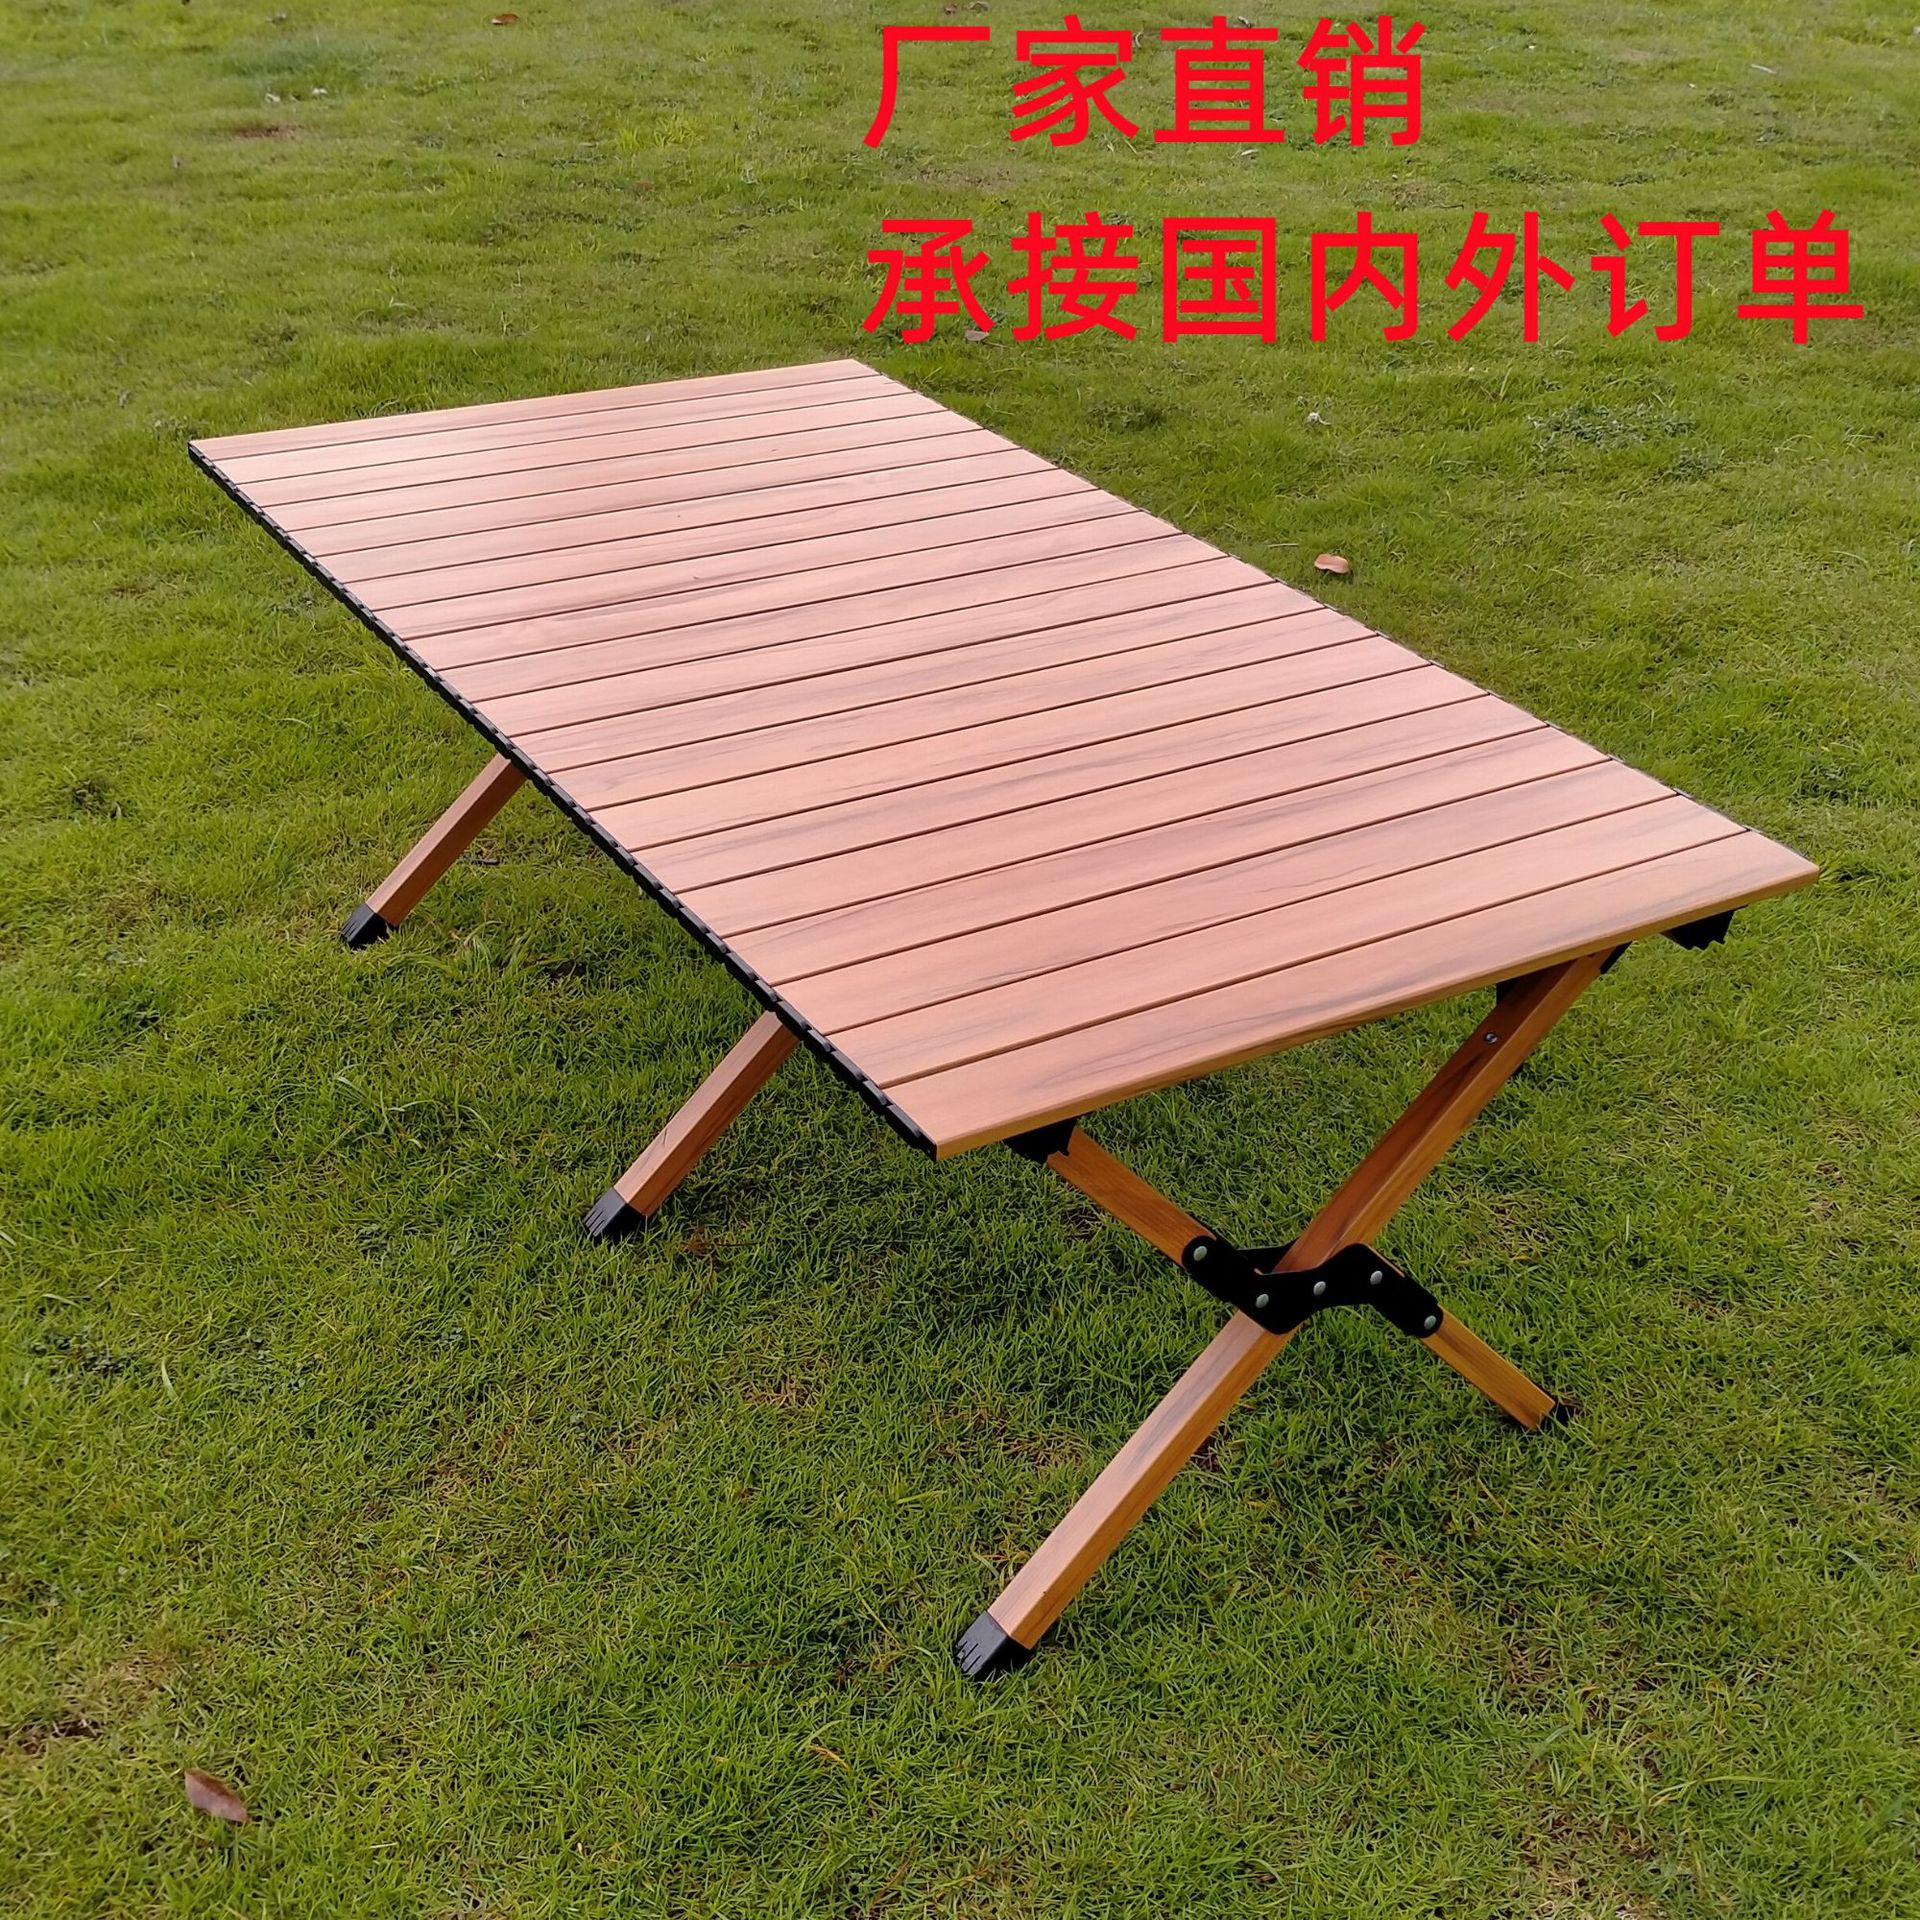 outdoor folding table aluminum alloy imitation wood camping egg roll table portable self-driving camping dinner barbecue table wood grain table